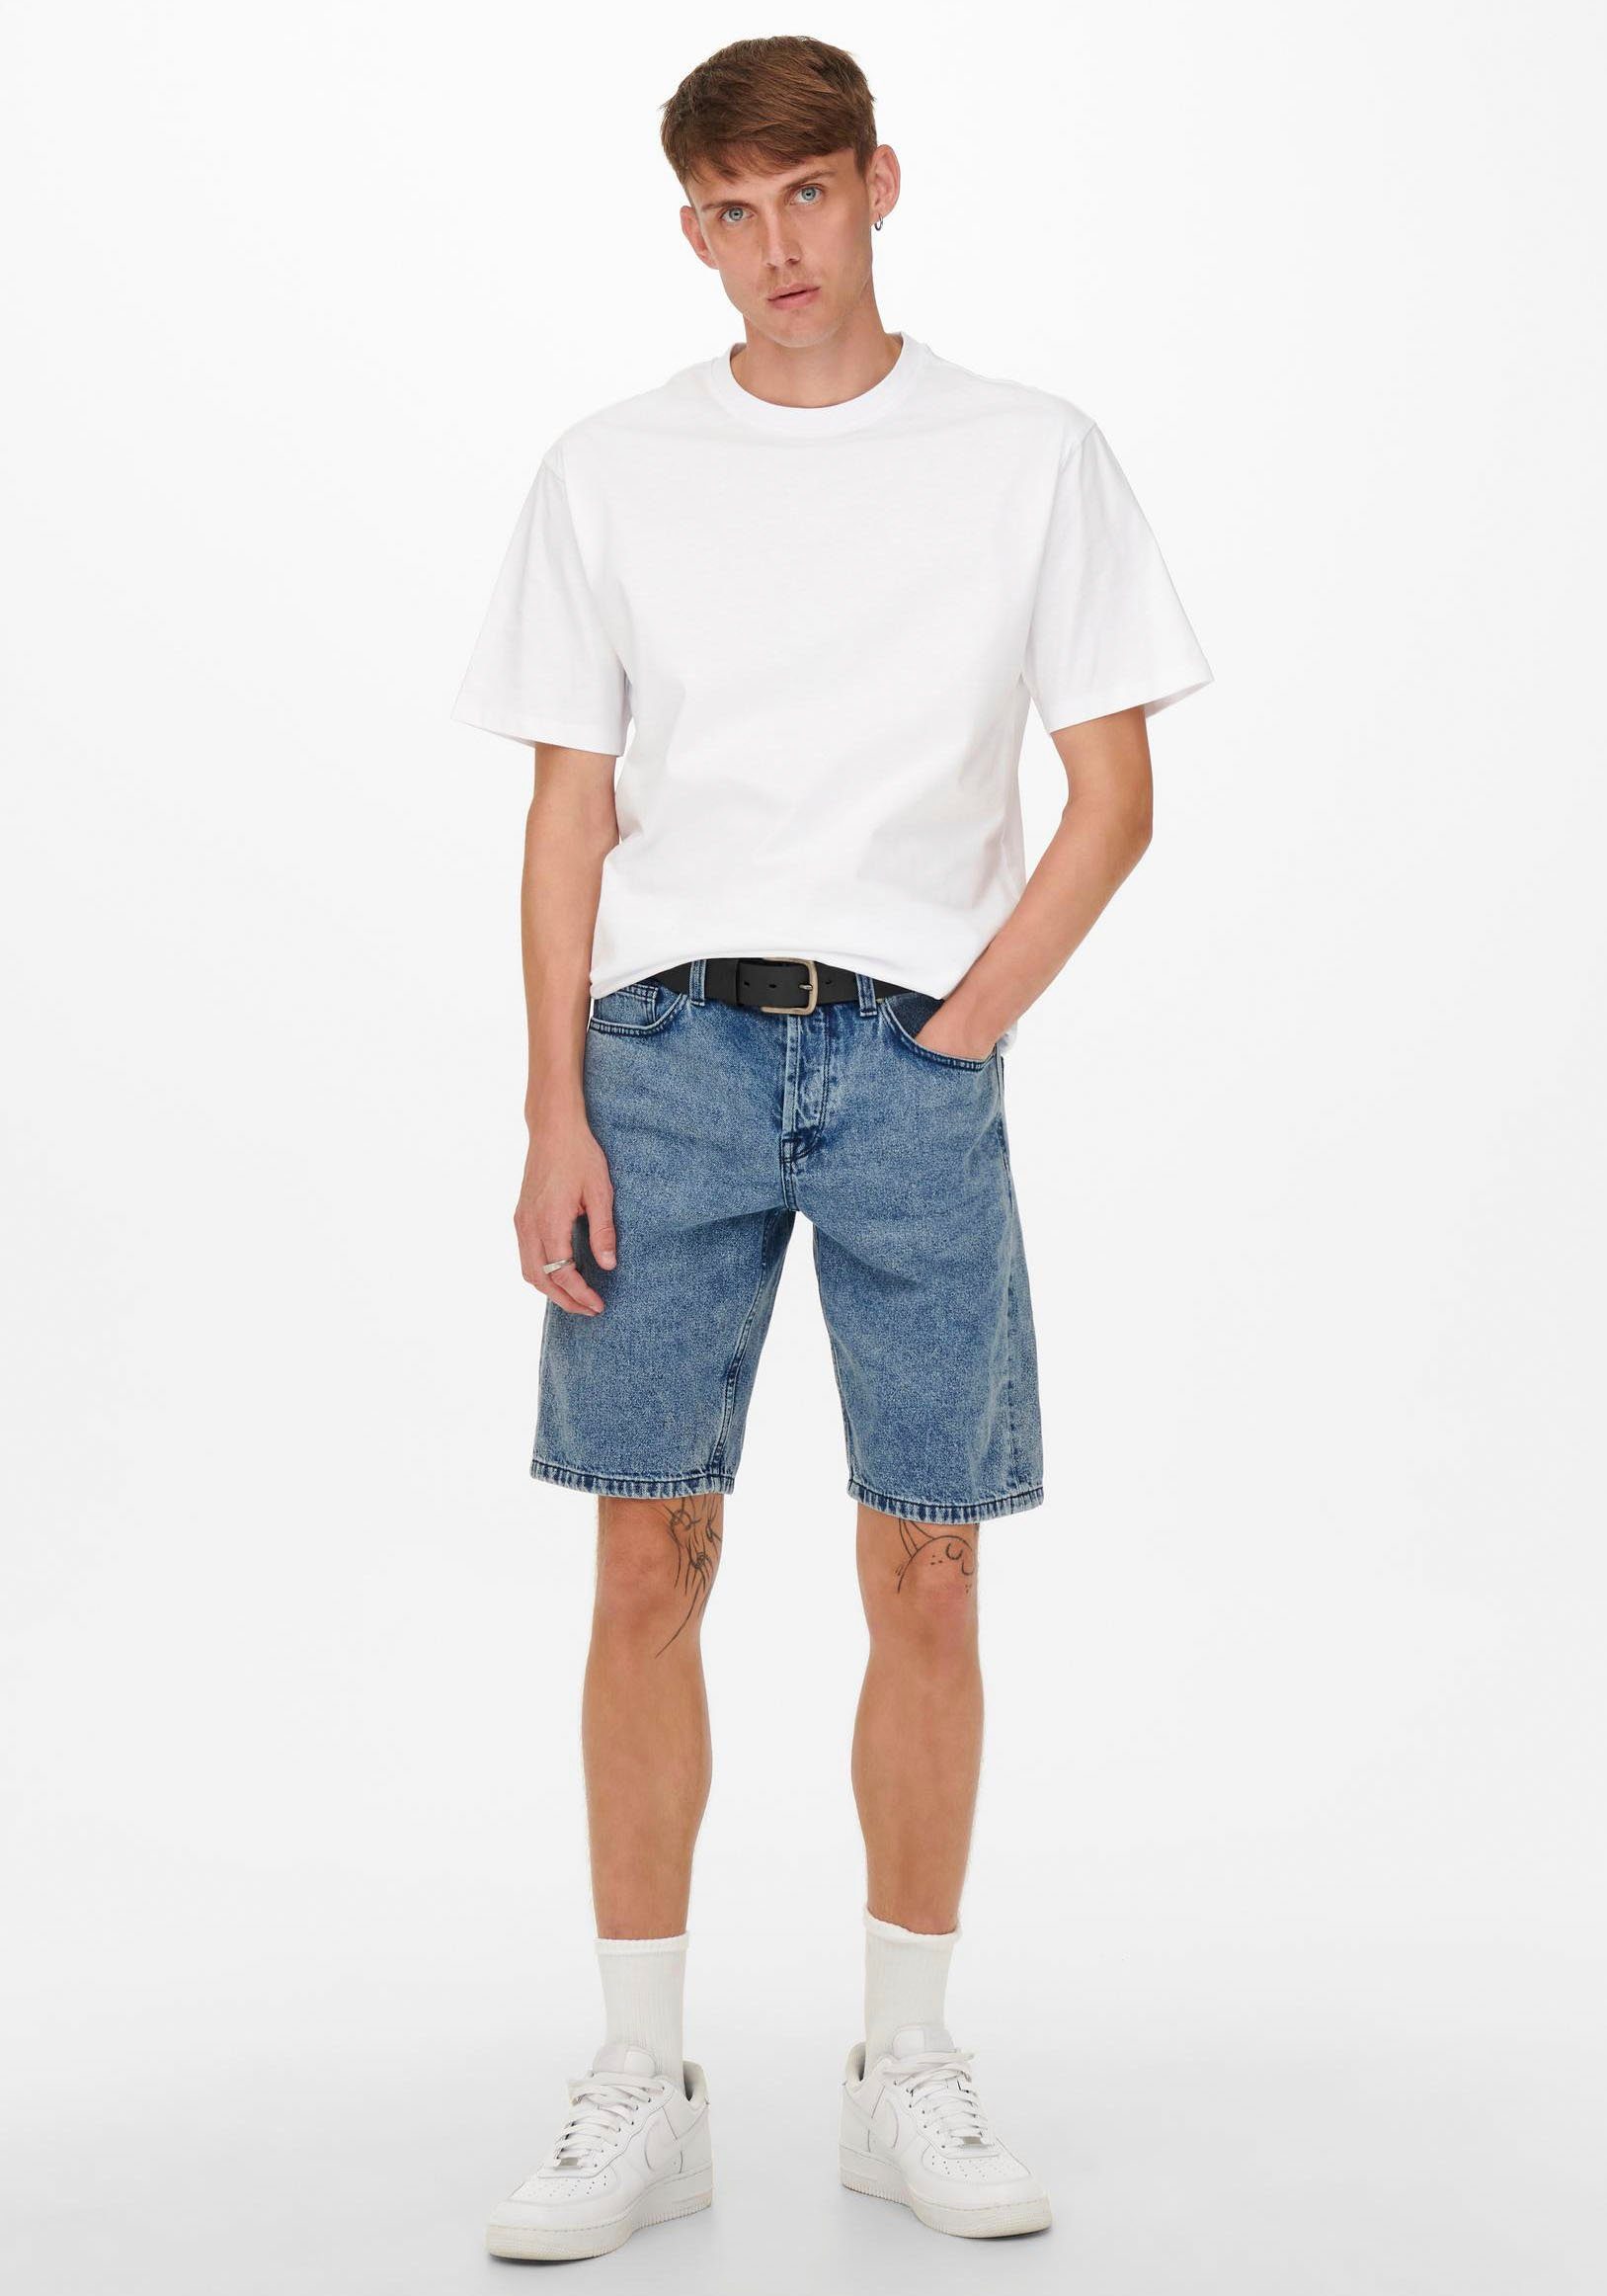 ONLY & SONS T-Shirt FRED weiß